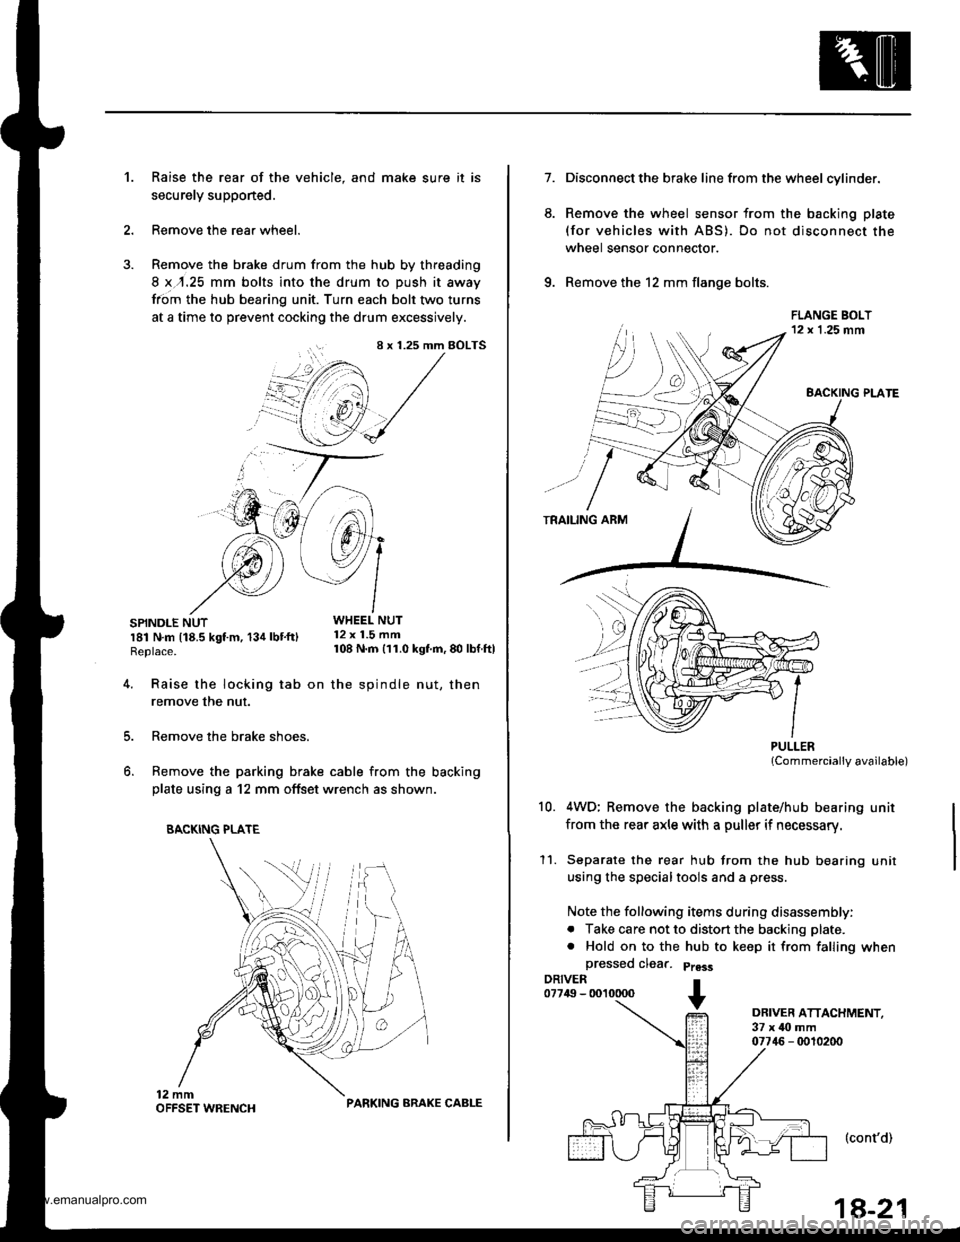 HONDA CR-V 1999 RD1-RD3 / 1.G Owners Manual 
Raise the rear of the vehicle, and make sure it is
securely supponed.
Remove the rear wheel.
Remove the brake drum from the hub by threading
8 x,r.25 mm bolts into the drum to push it away
from the h